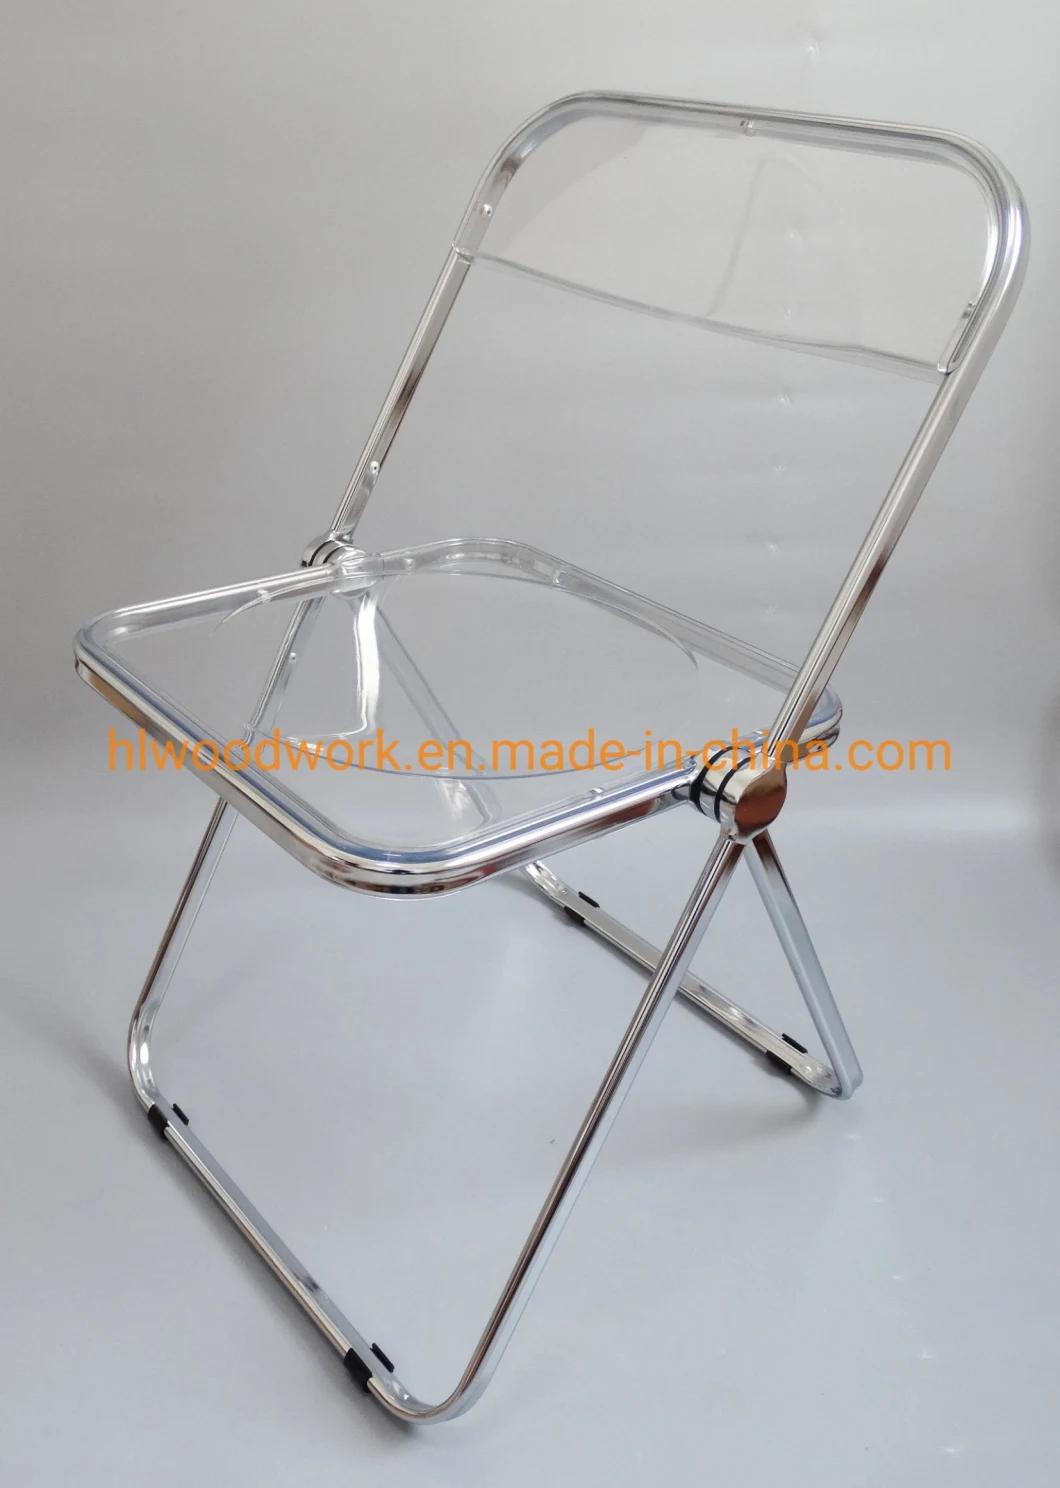 Modern Transparent Pink Folding Chair PC Plastic Dining Chair Chrome Frame Office Bar Dining Leisure Banquet Wedding Meeting Chair Plastic Dining Chair